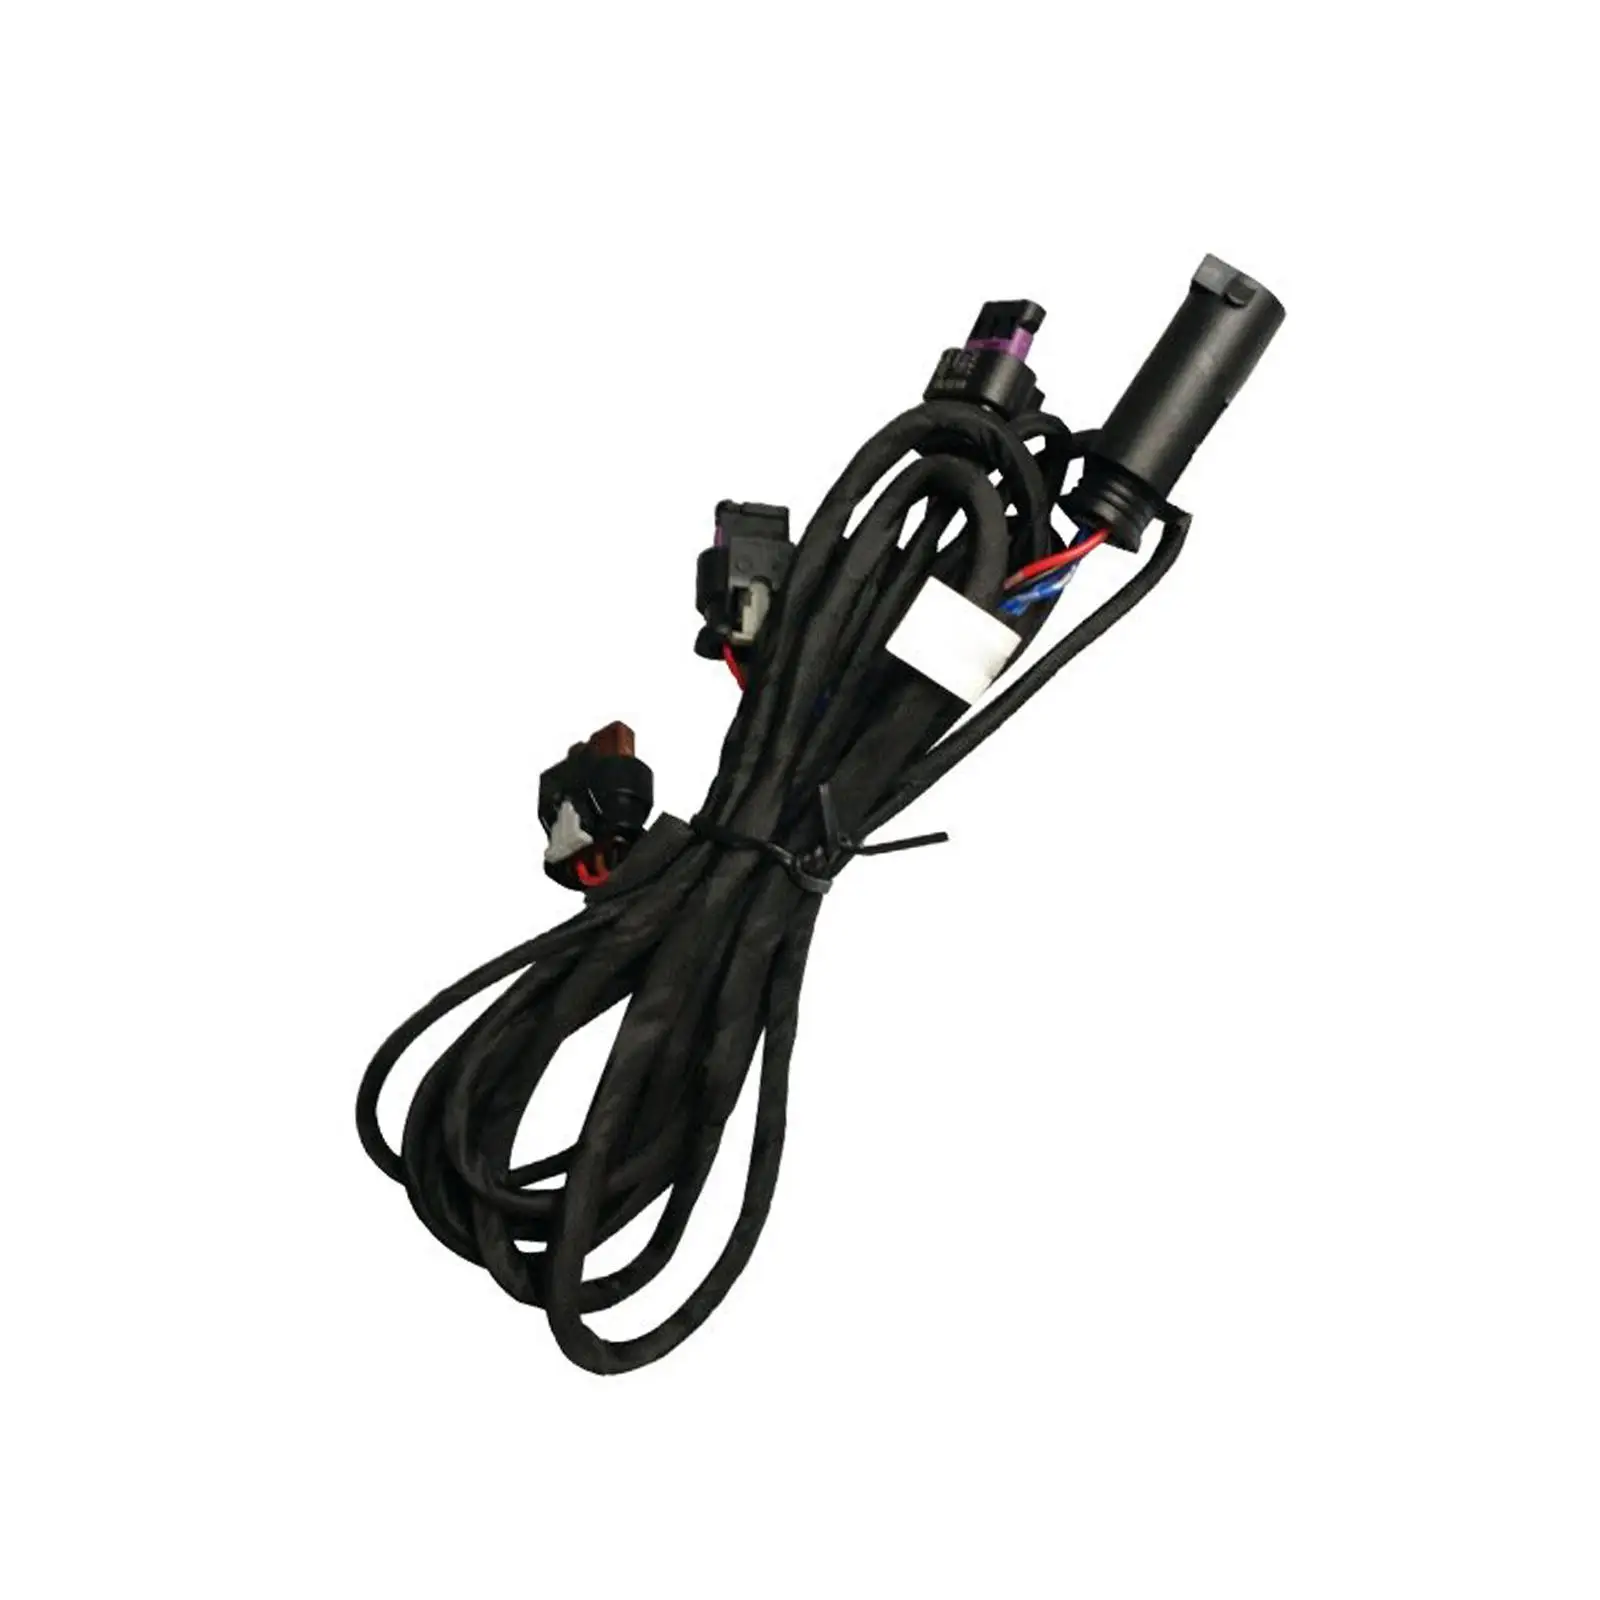 Parking Cables Car Accessories, Front Rear Wiring Harness Replaces for 3 Series 4 Series F32 Lci F30 ,Sturdy, Premium